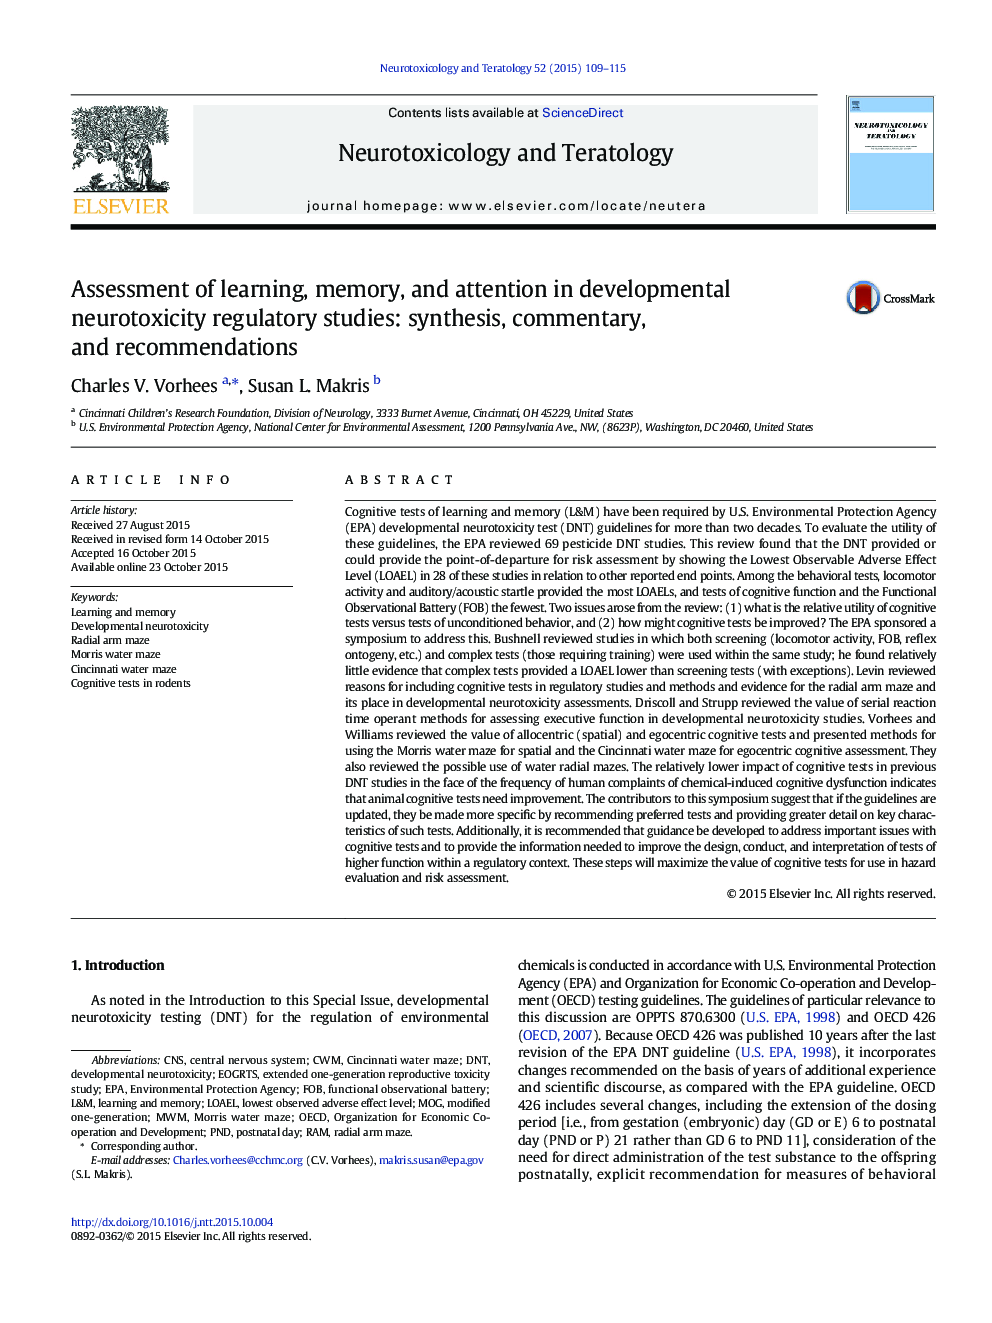 Assessment of learning, memory, and attention in developmental neurotoxicity regulatory studies: synthesis, commentary, and recommendations